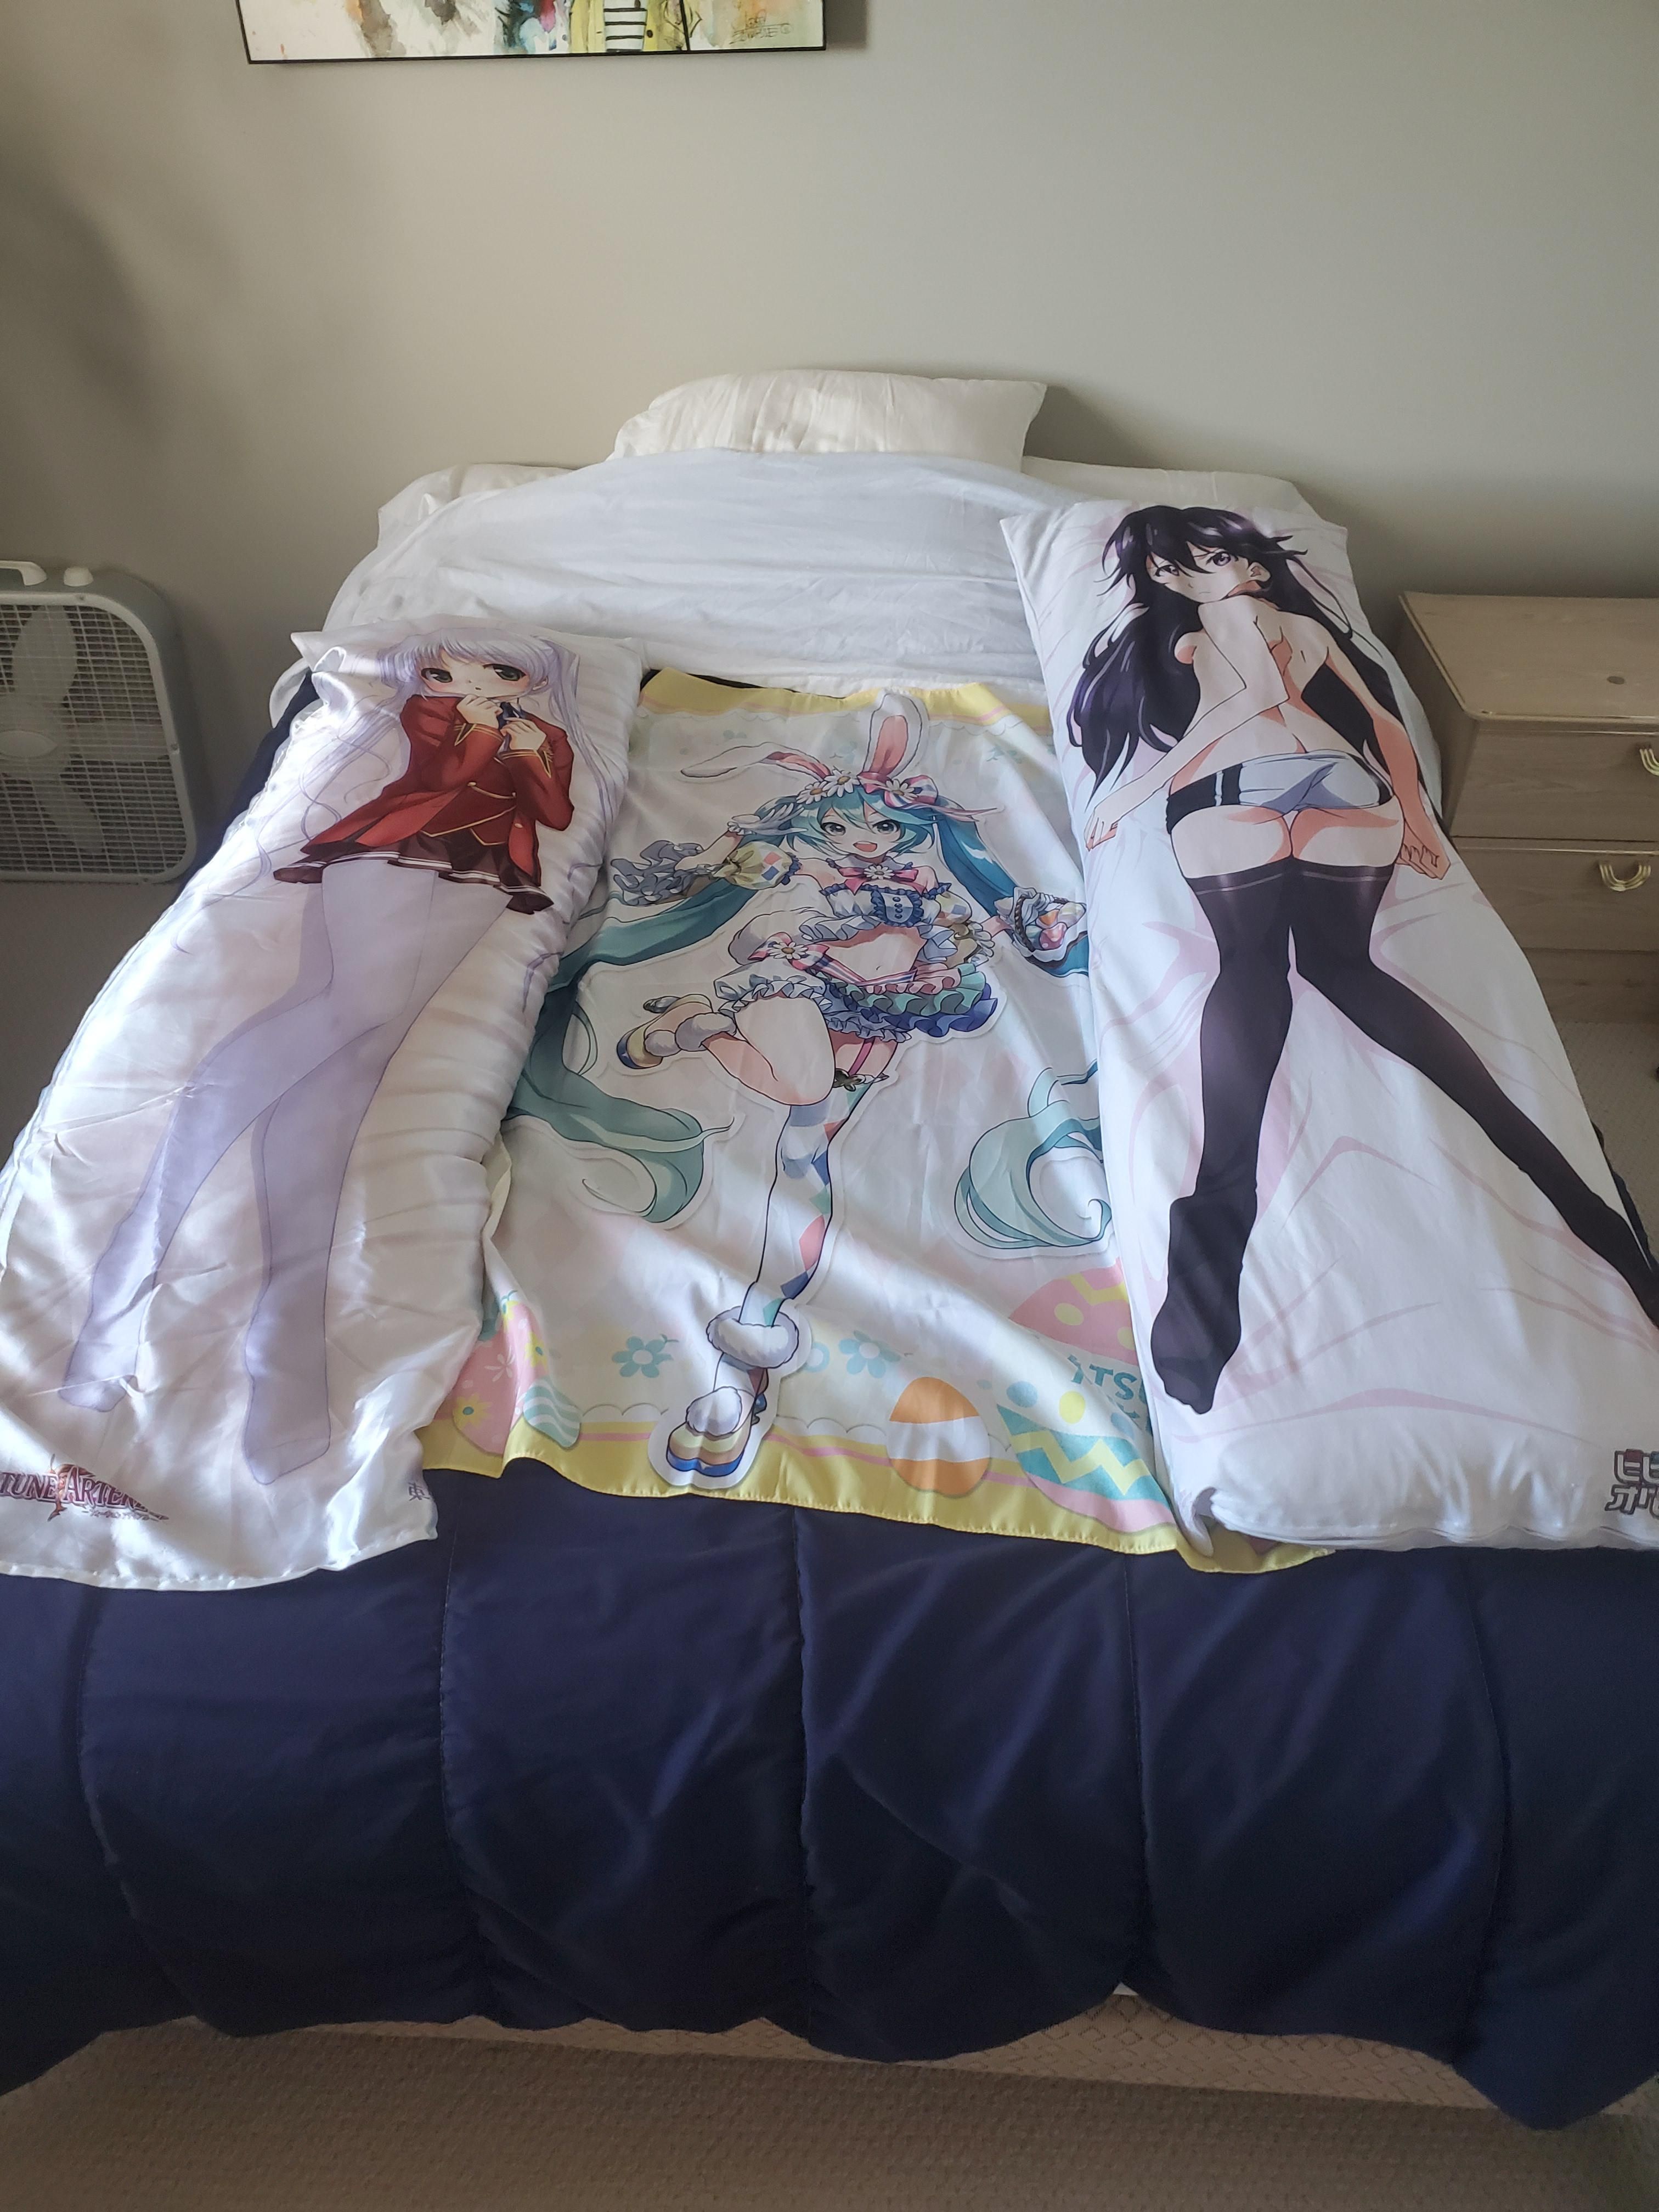 Friend from England is coming to visit Canada and stay in my guest room. Finally found a use for the bargain bin pillows I brought home from Japan. He is not allowed to remove them.